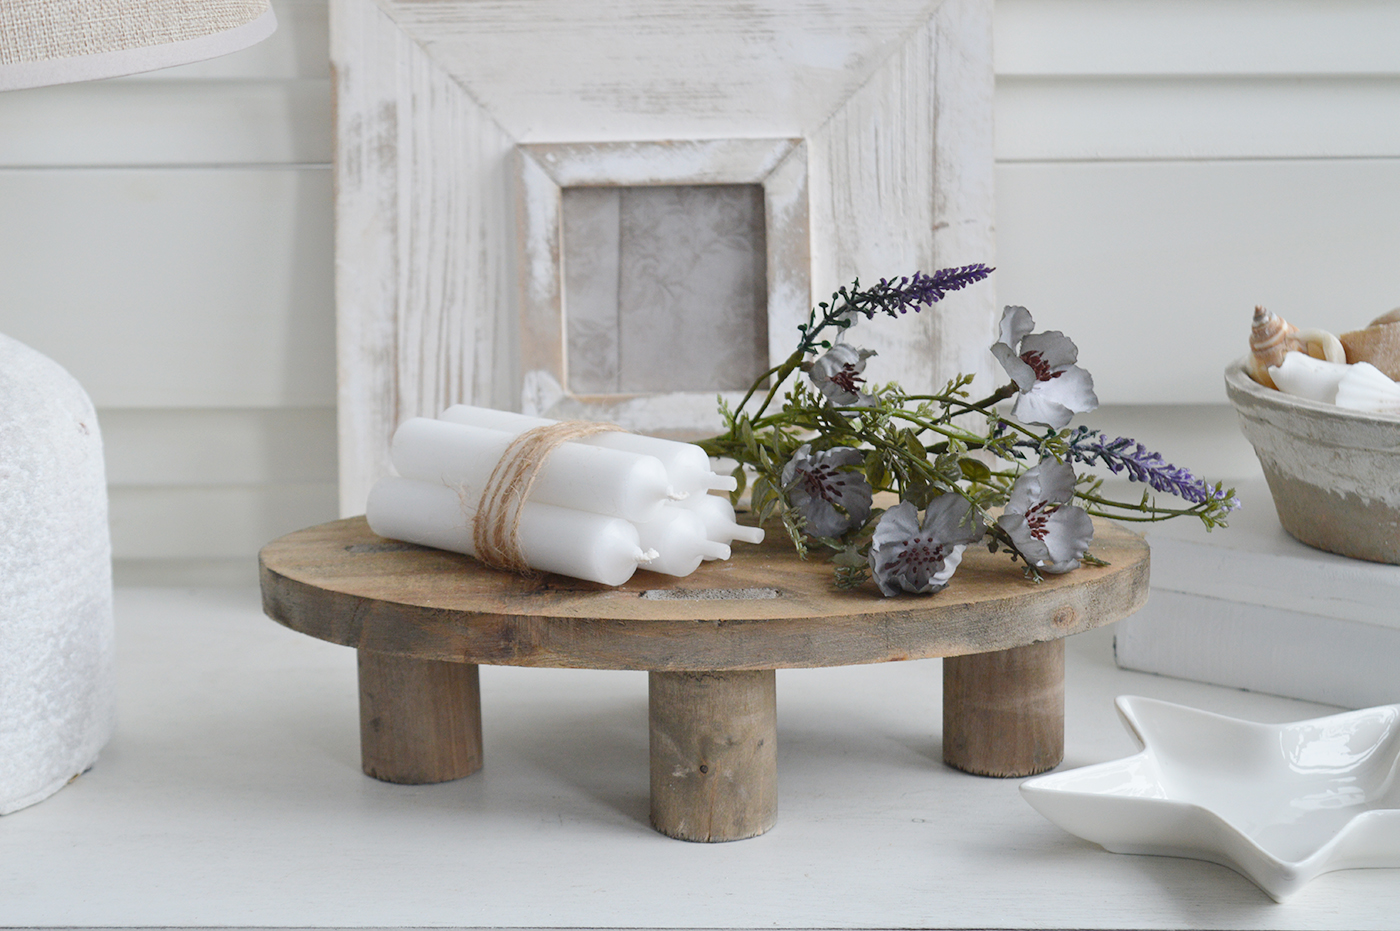 New England style interiors. Coffee table styling for coastal, modern farmhouse and country homes from The White Lighthouse Furniture